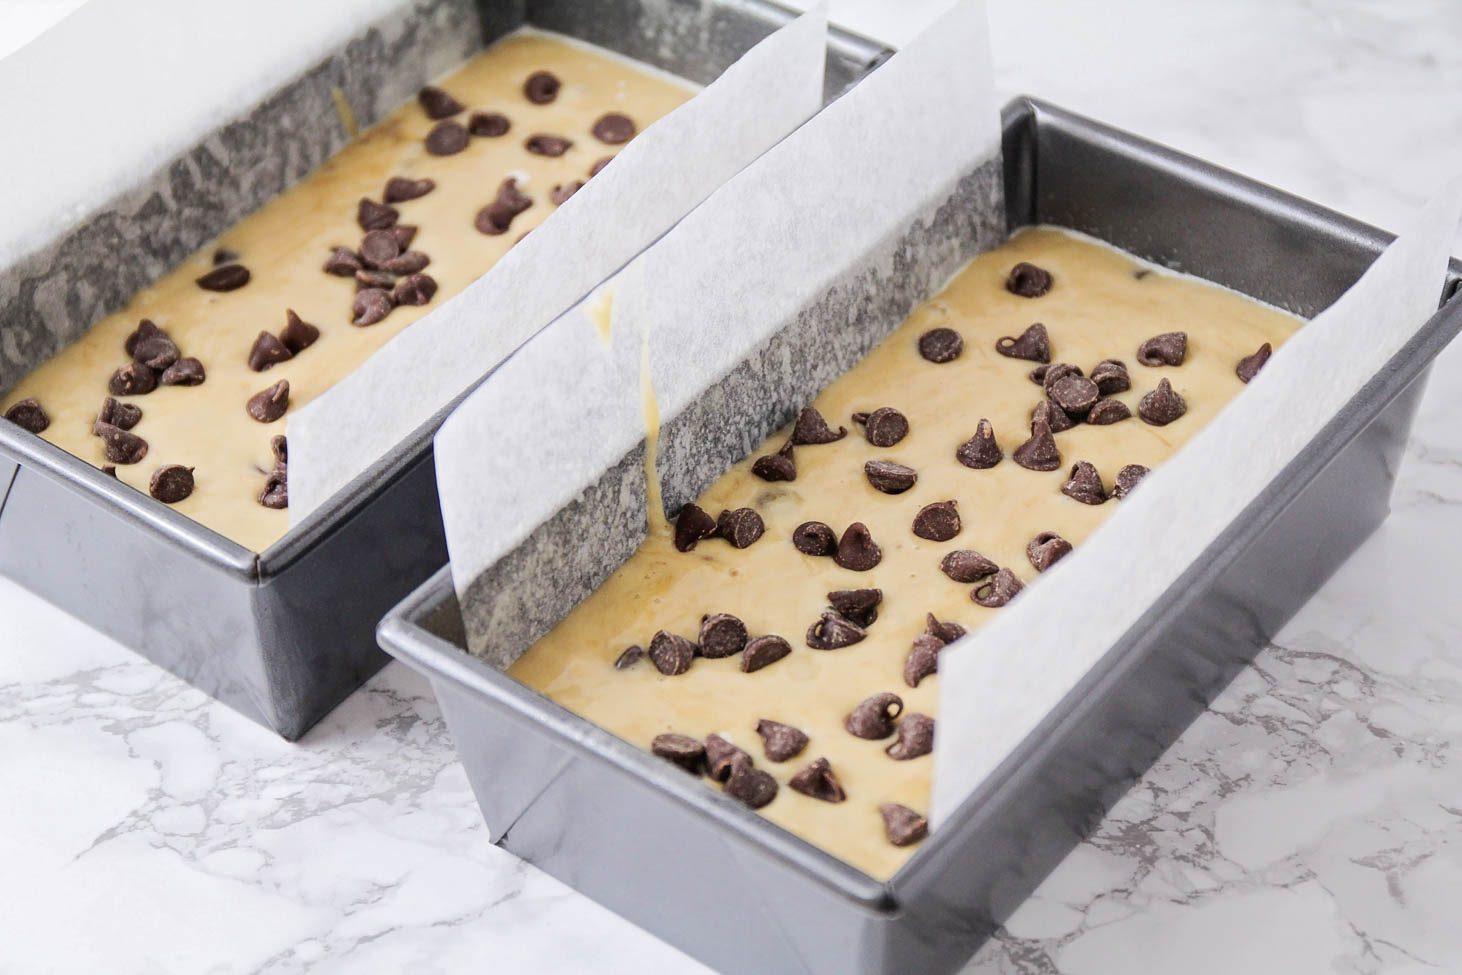 Chocolate chip banana bread batter in bread pans ready for baking.